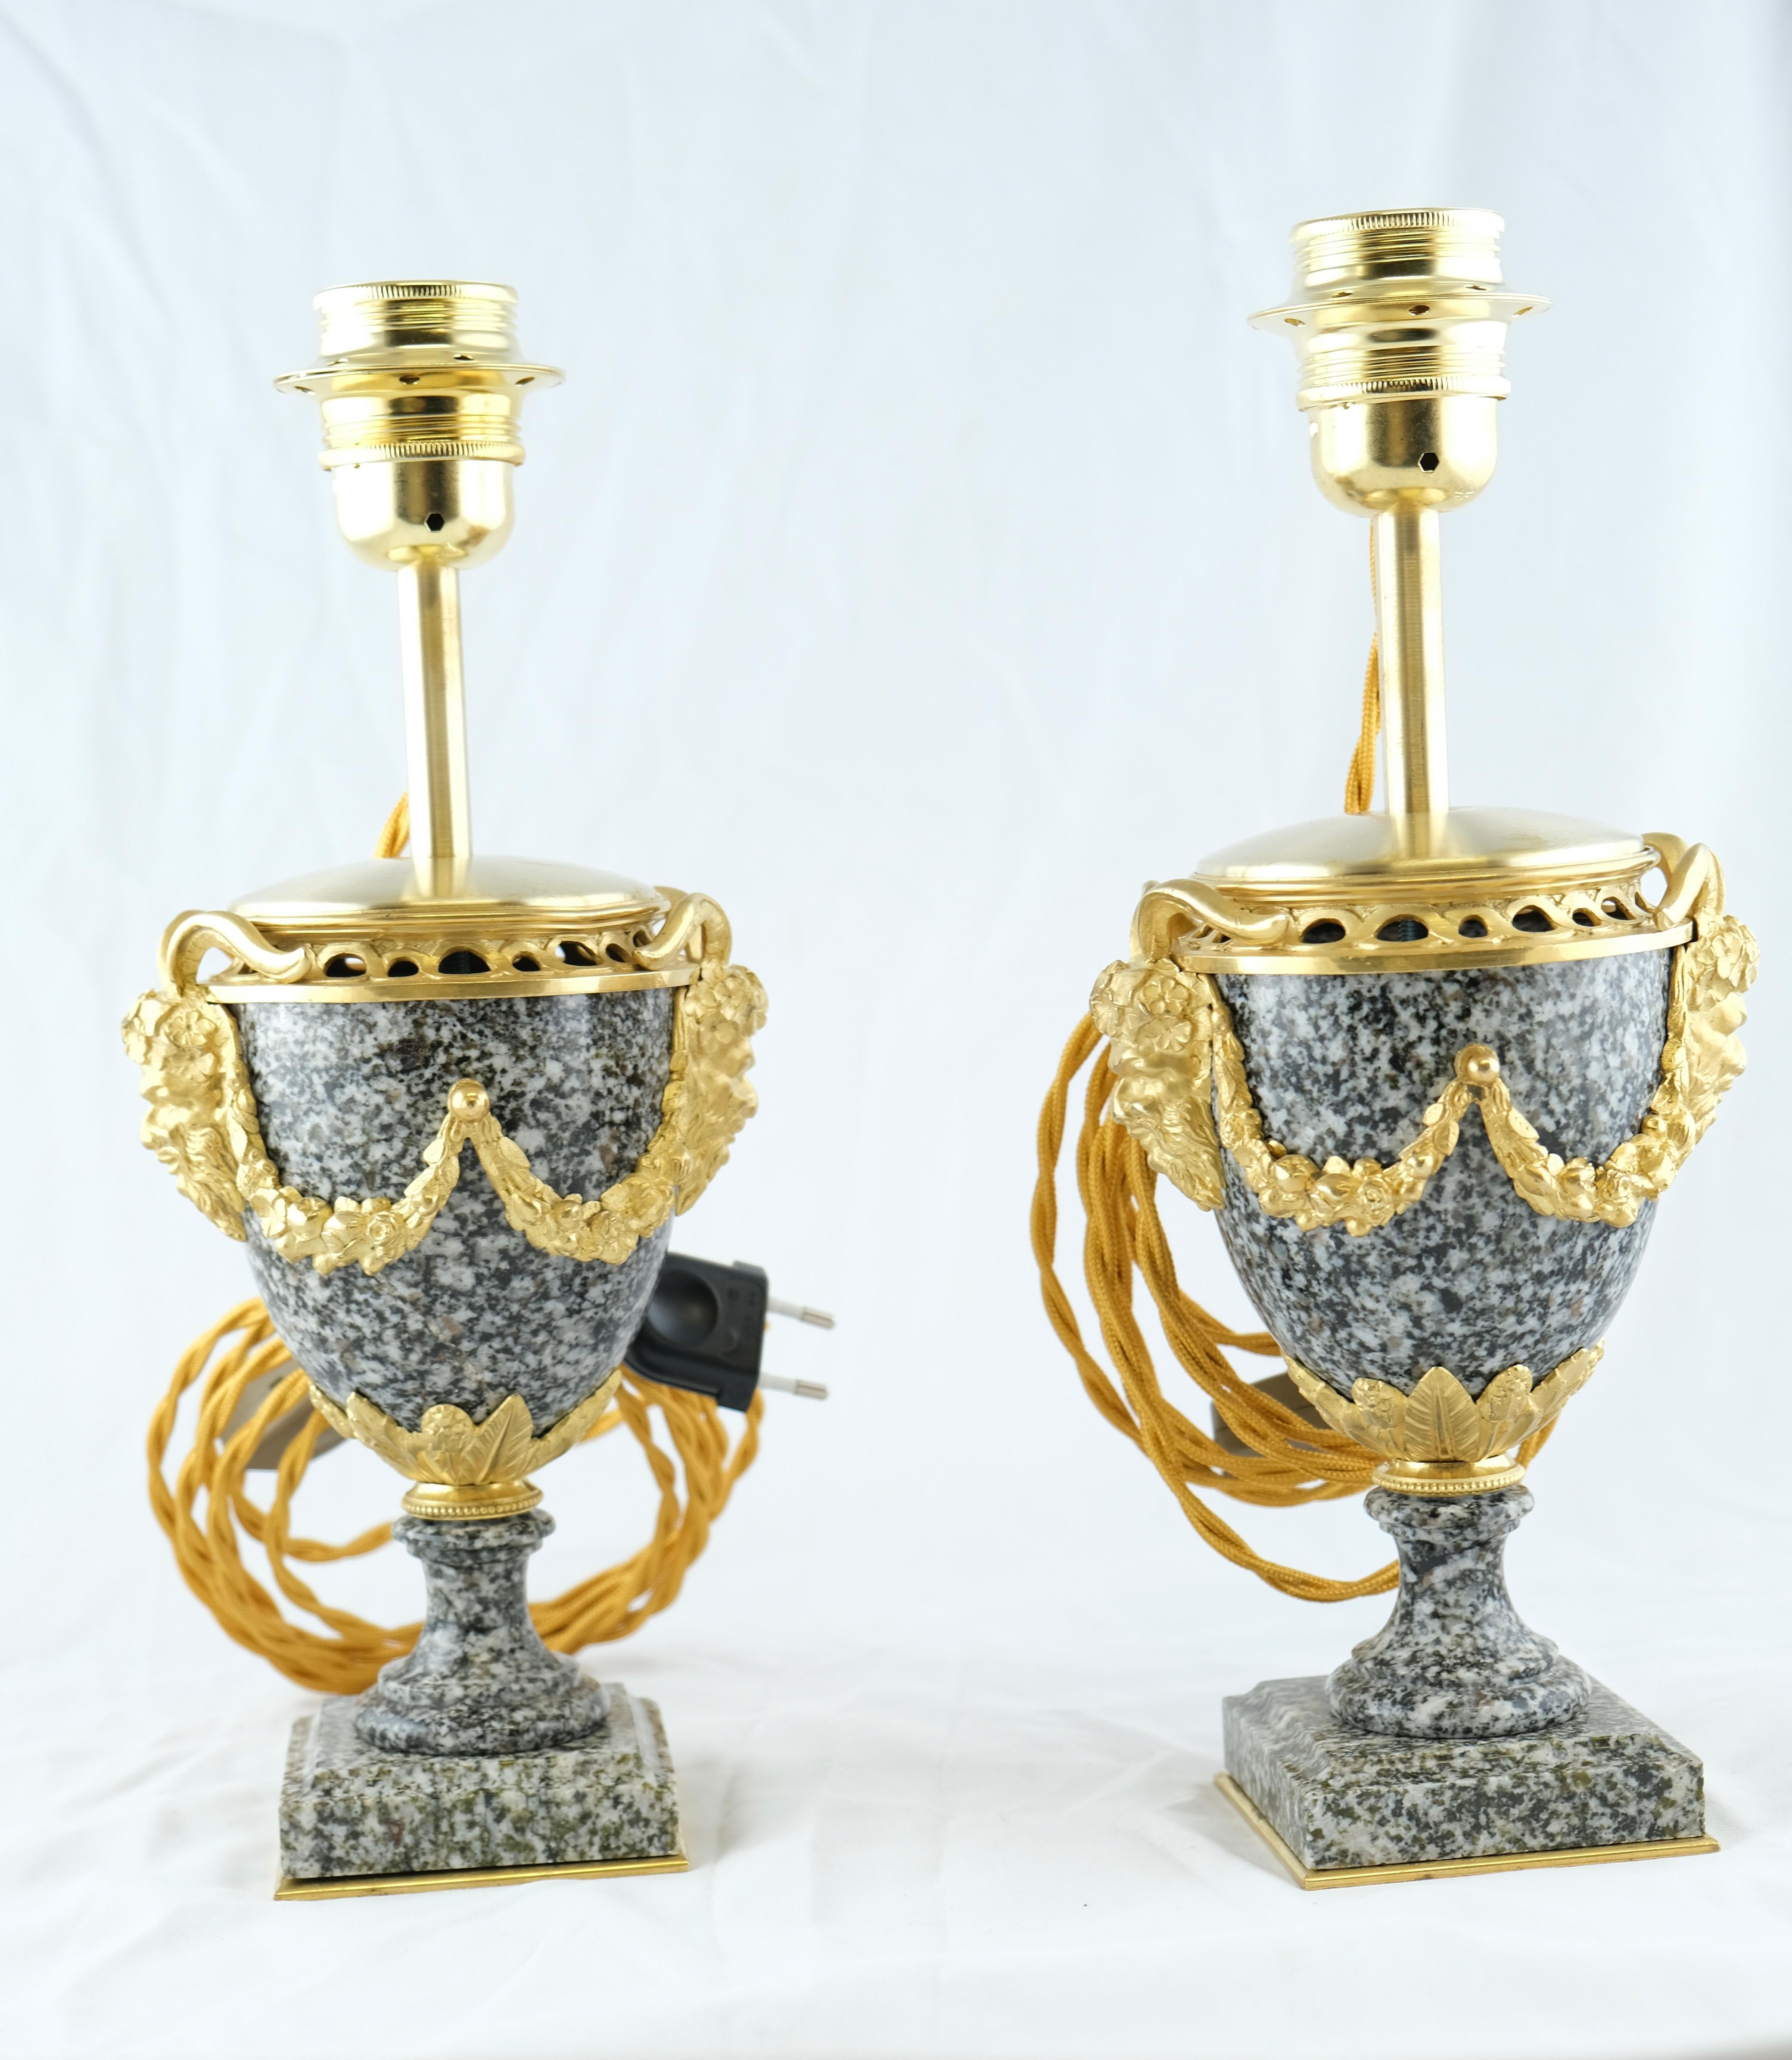 An attractive pair of granite urns mounted with gilt bronze decorations. The urns are electrified and mounted as lamps. The bronzes are of good quality as well as the granite urns.
 